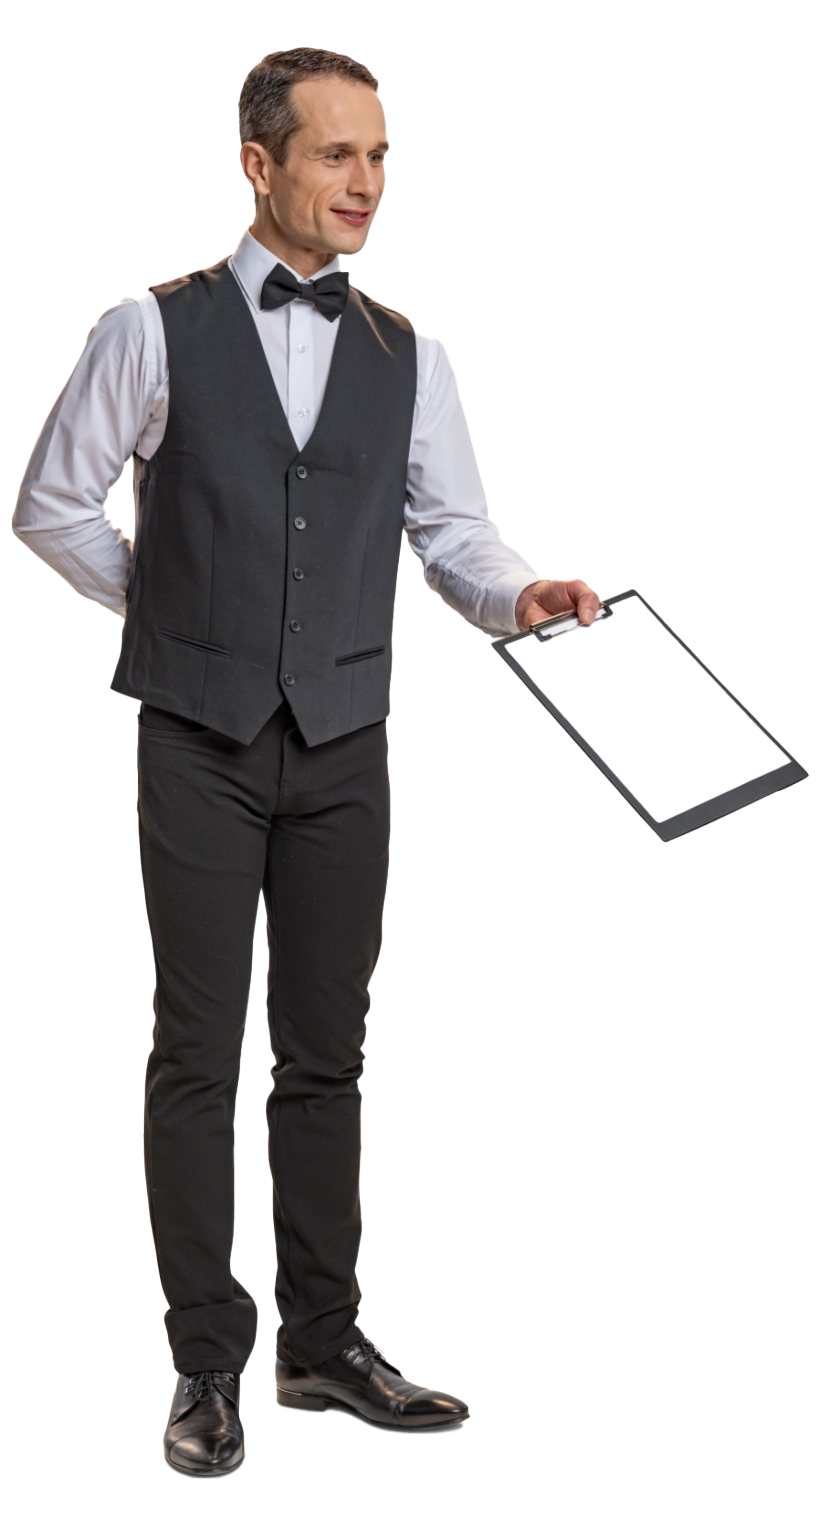 waiter png